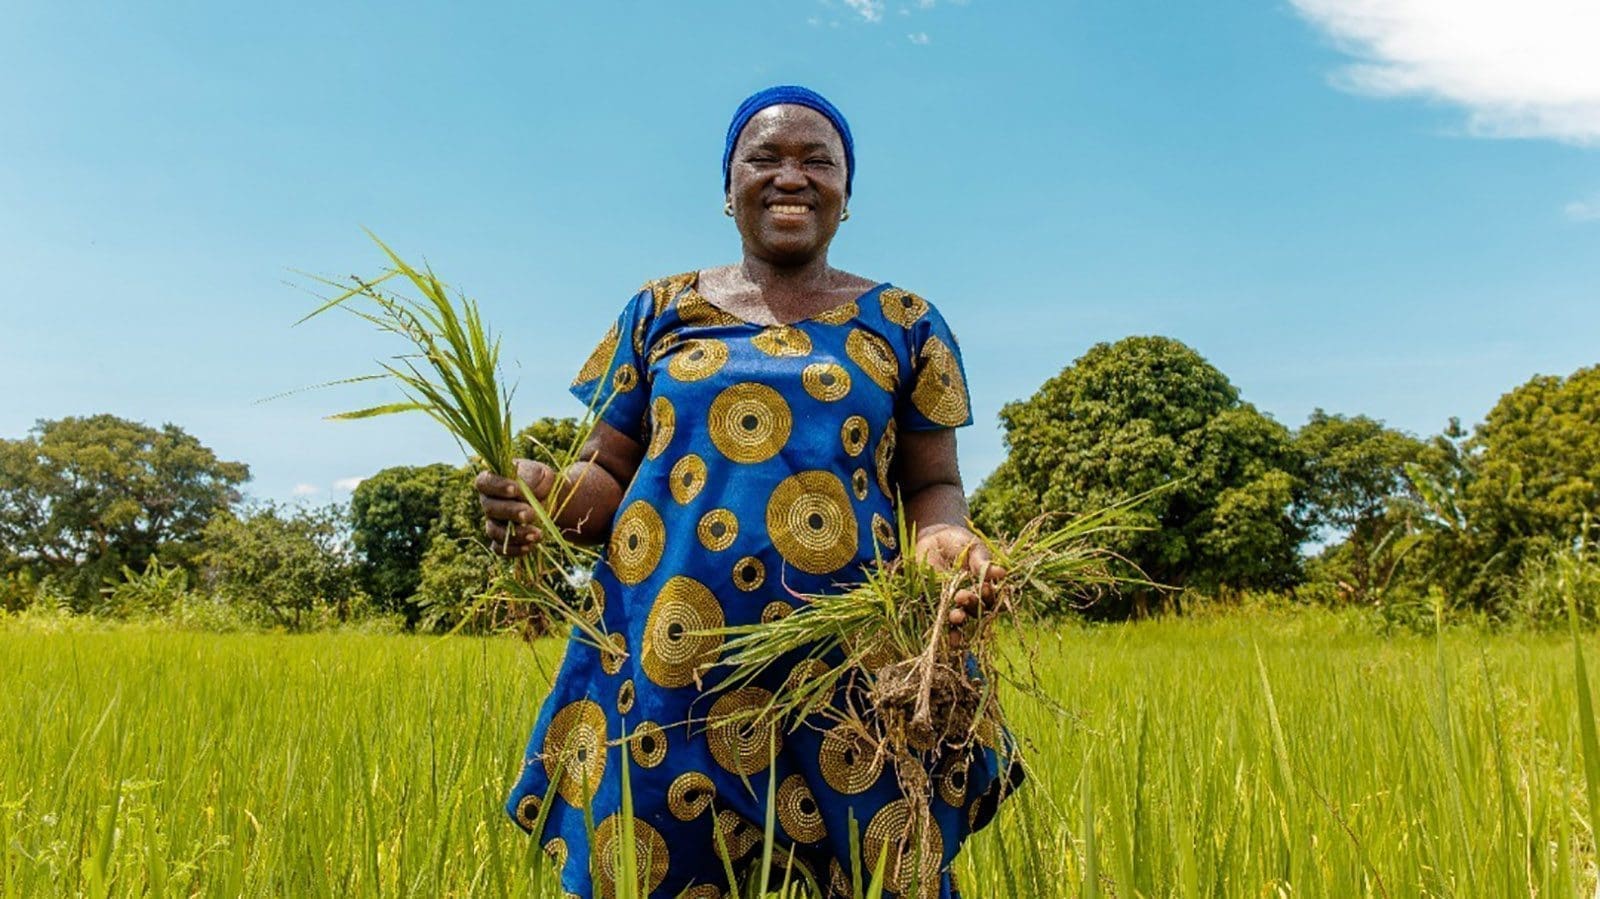 <strong>Nestlé backs Africa Food Prize to drive transformation in Africa’s agriculture, food systems</strong>